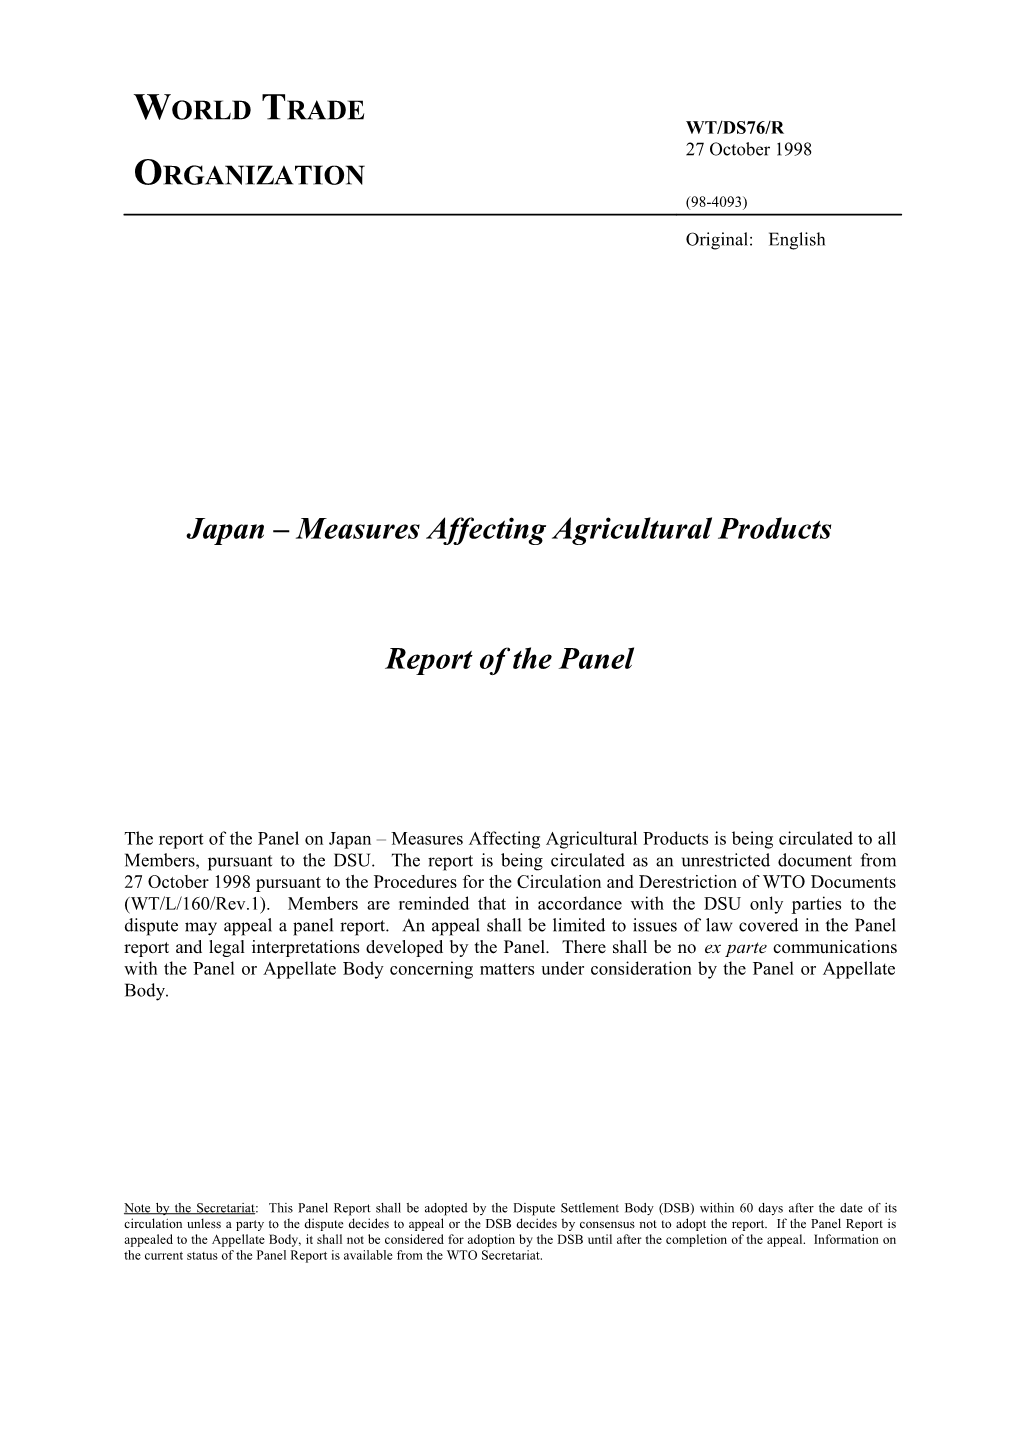 Japan Measures Affecting Agricultural Products